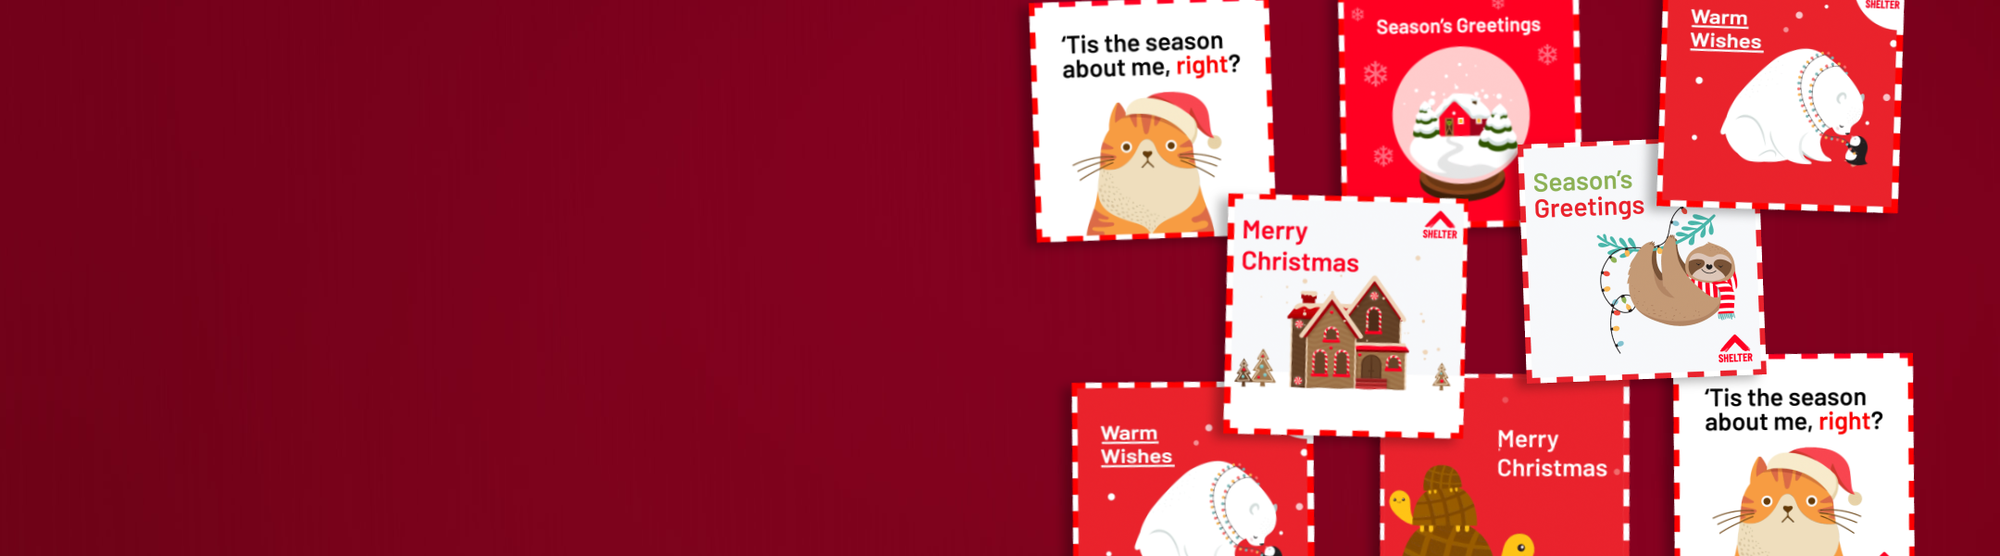 Red background with an array of ecard designs overlaid. Designs include festive images and greetings.